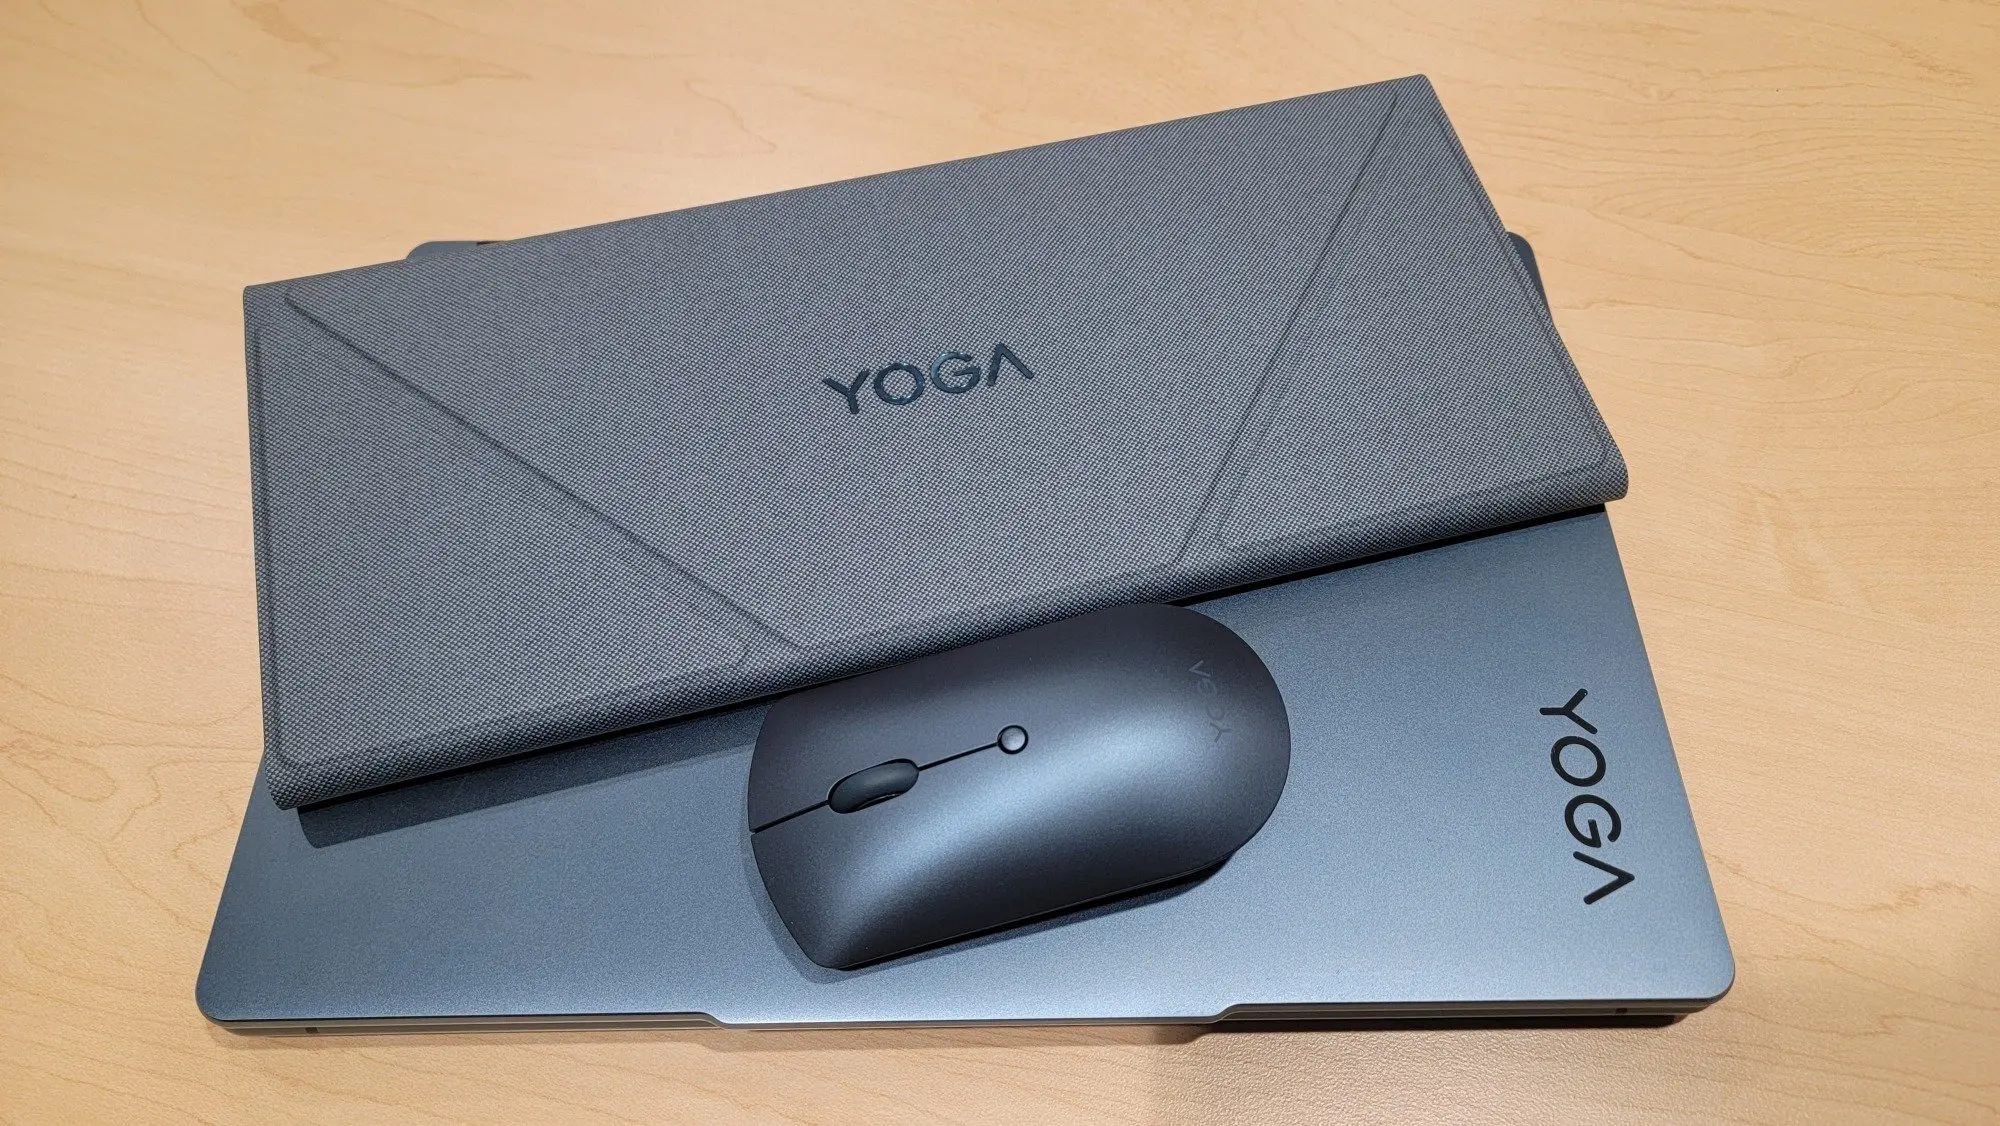 Yoga Book 9i peripherals on a table